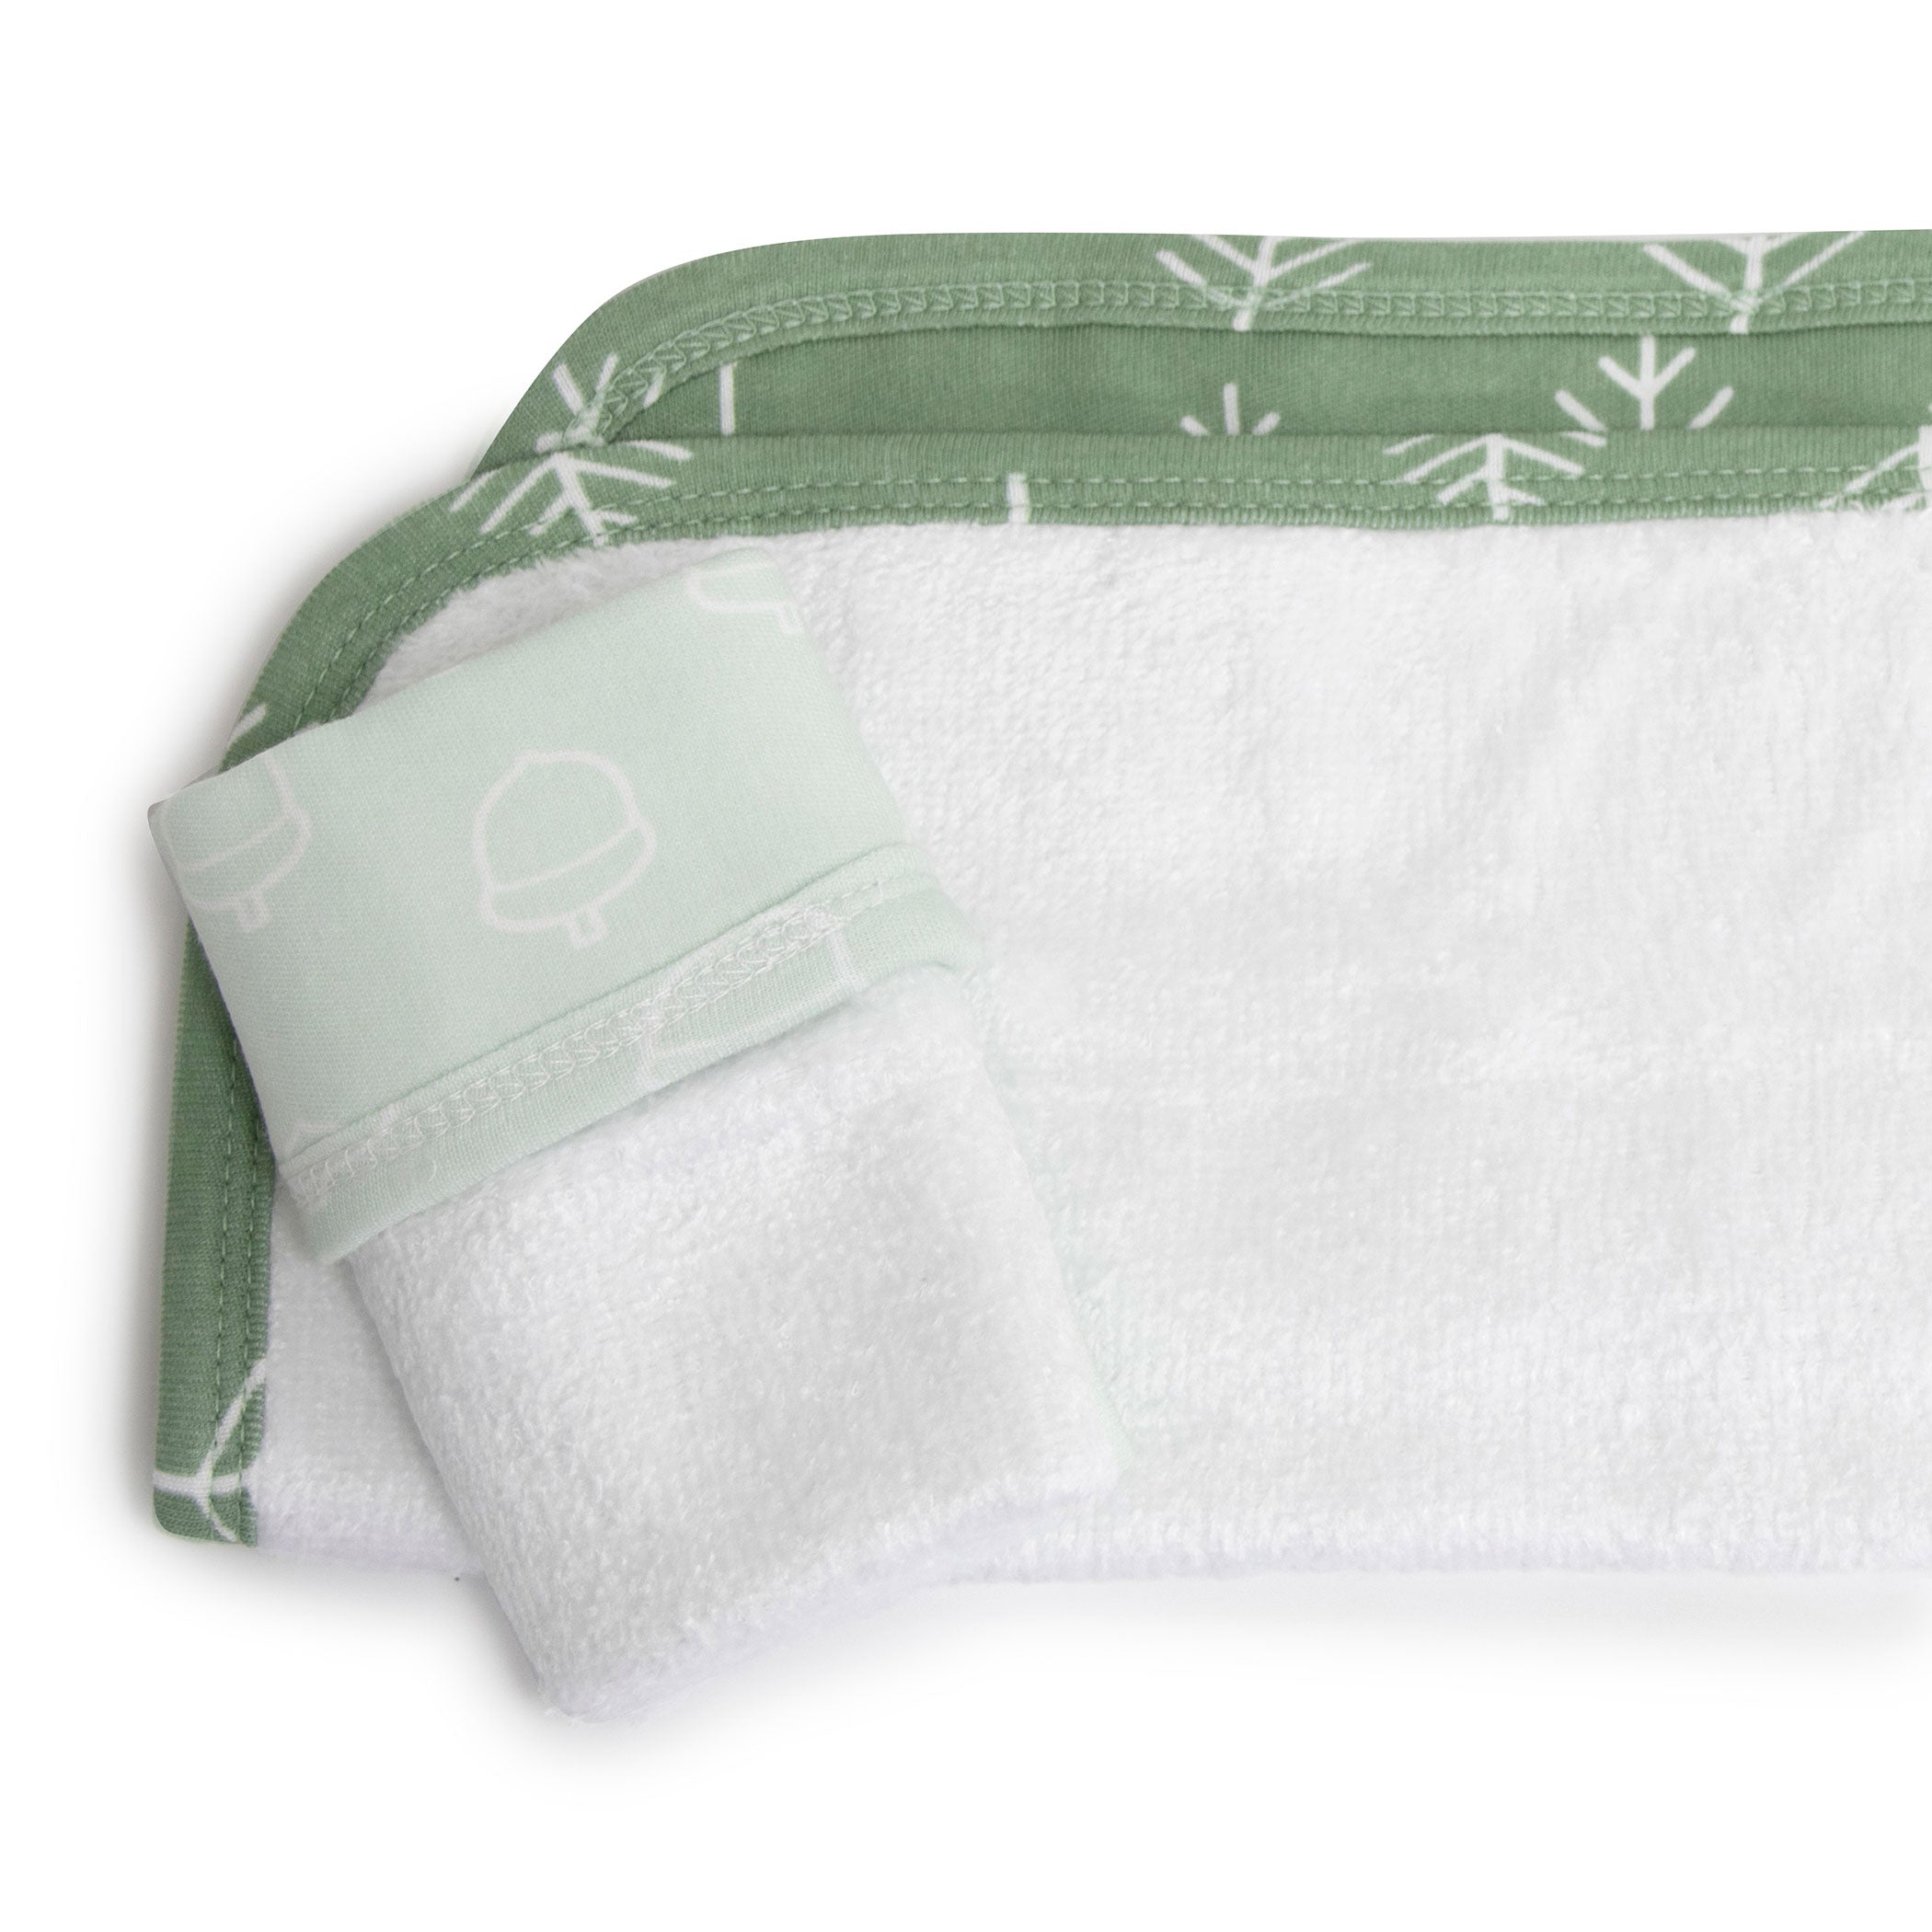 Nordic Avocado/Forest Bundle - Hooded Towel, Change Mat Cover, Face Washer, Jersey Wrap, Security Blanket